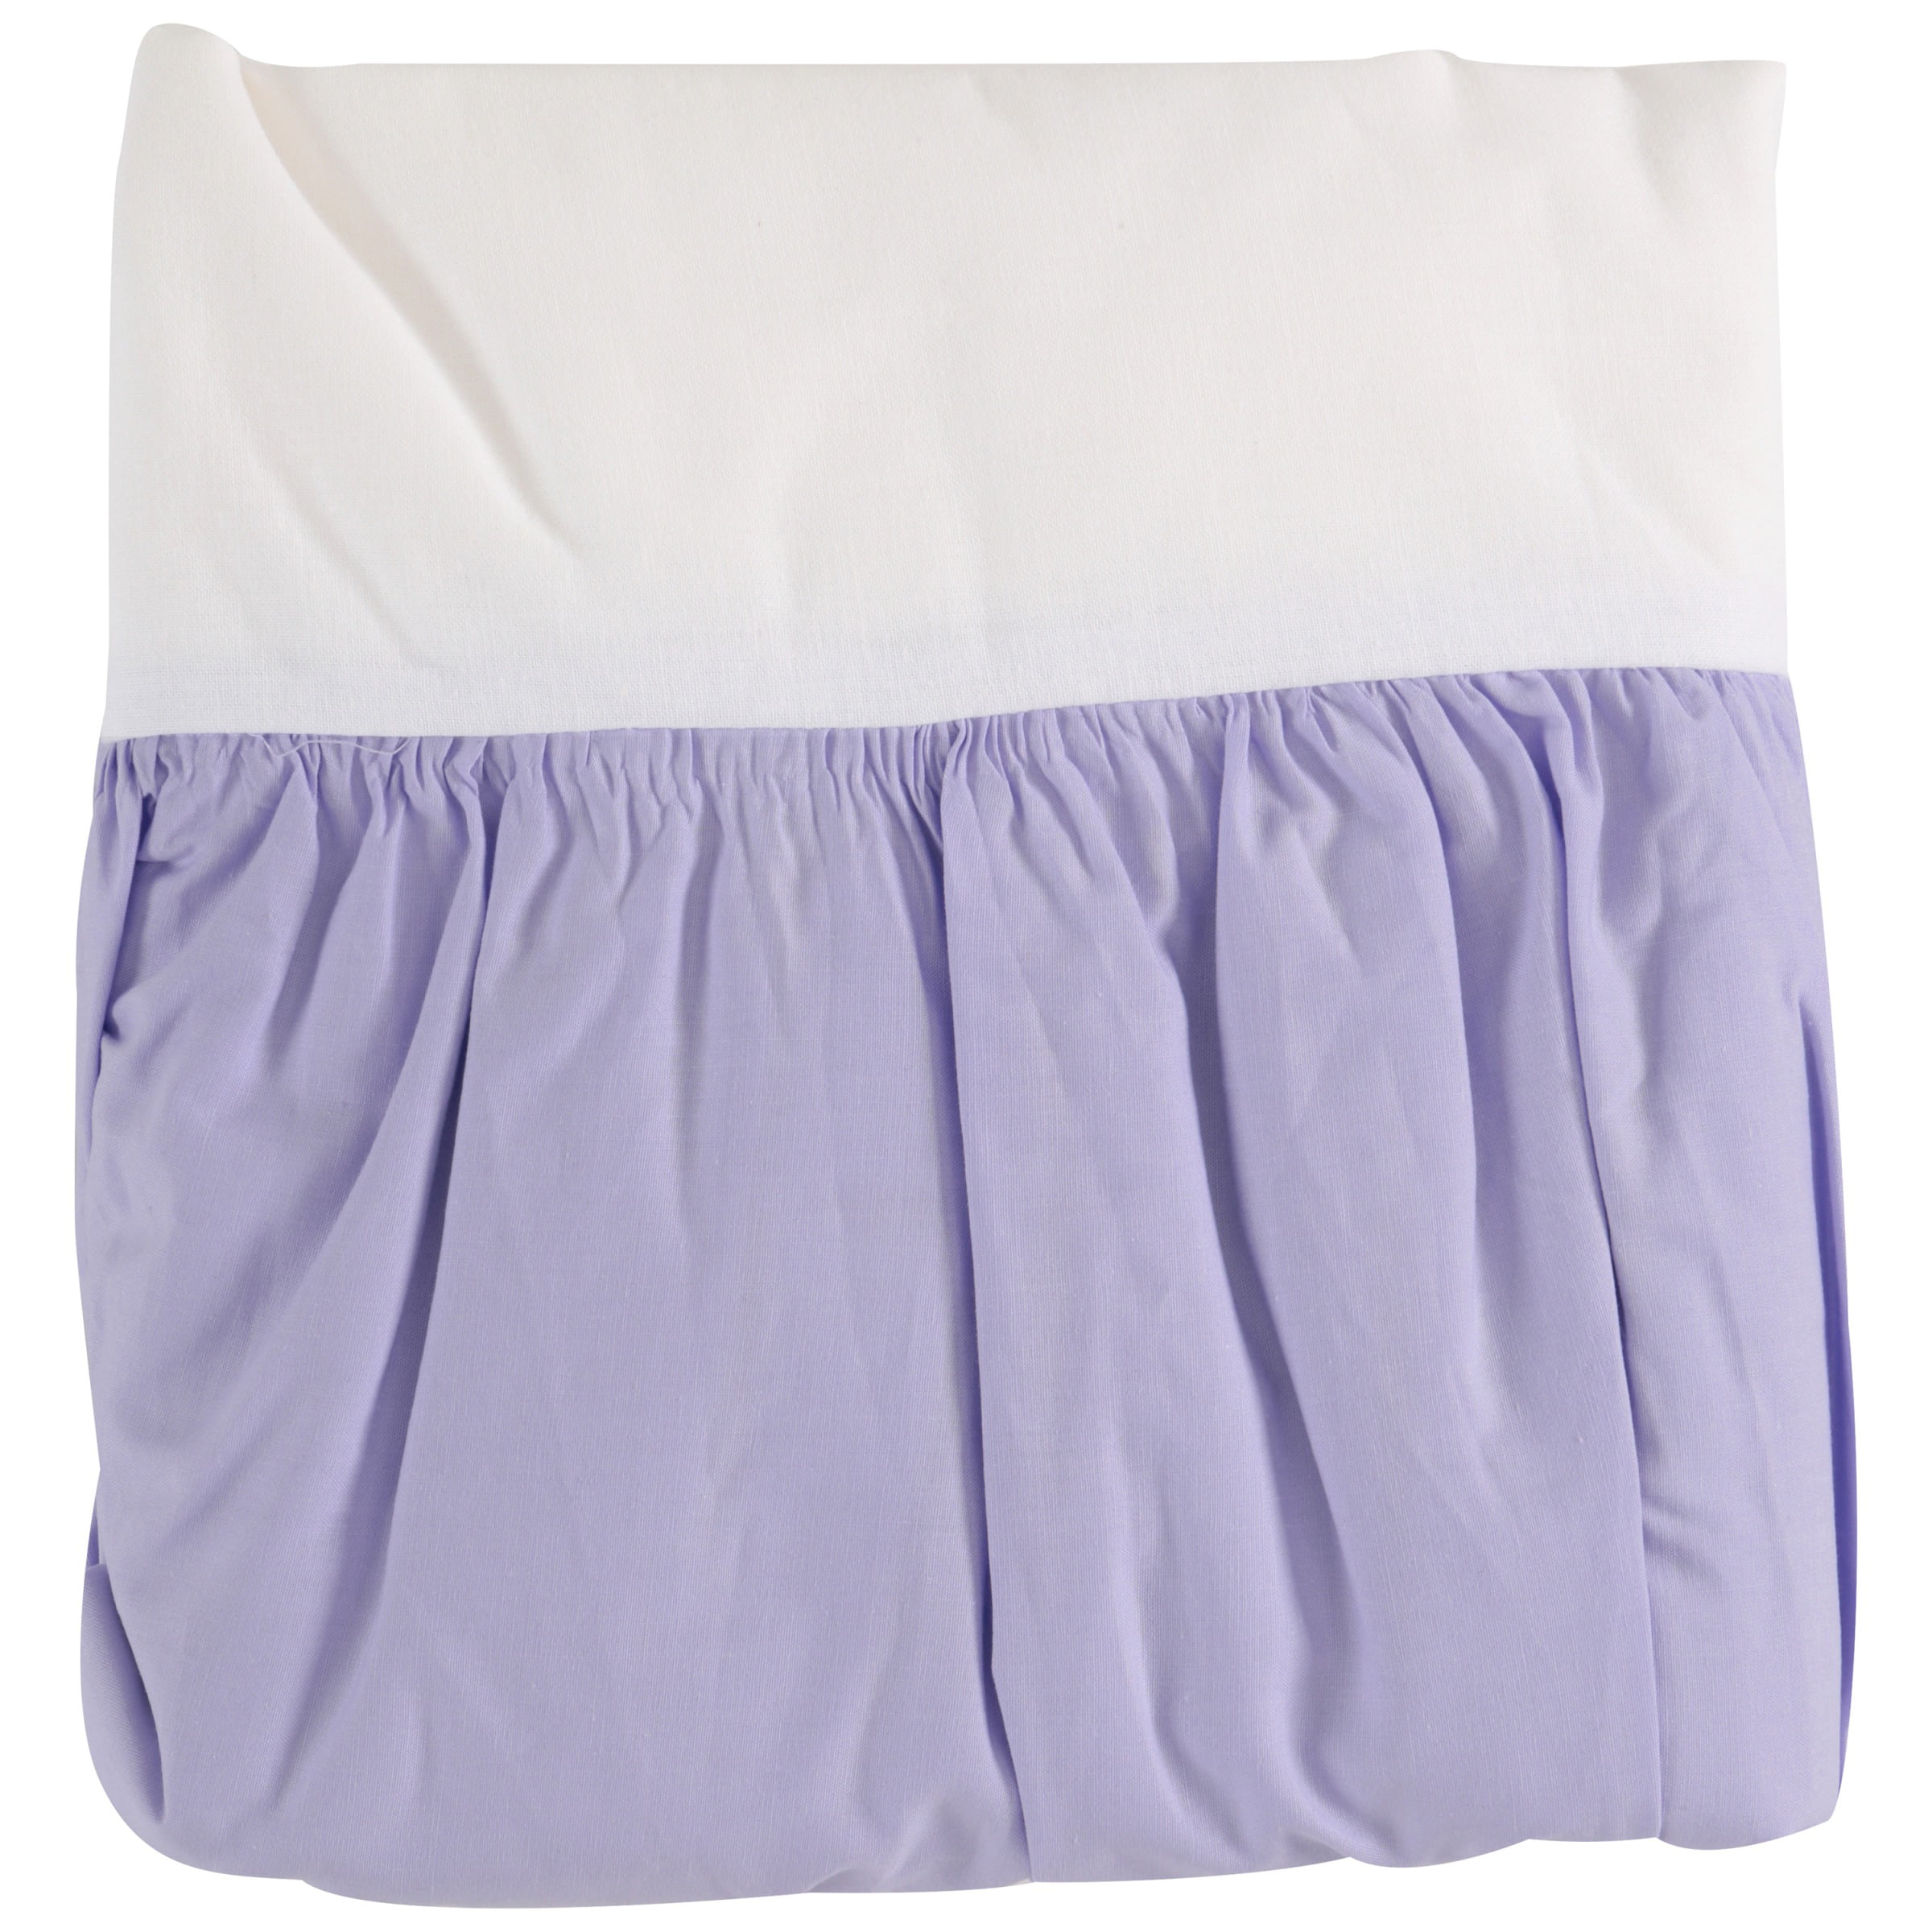 TL Care 100% Natural Cotton Percale Crib Bed Skirt, Lavender, Soft